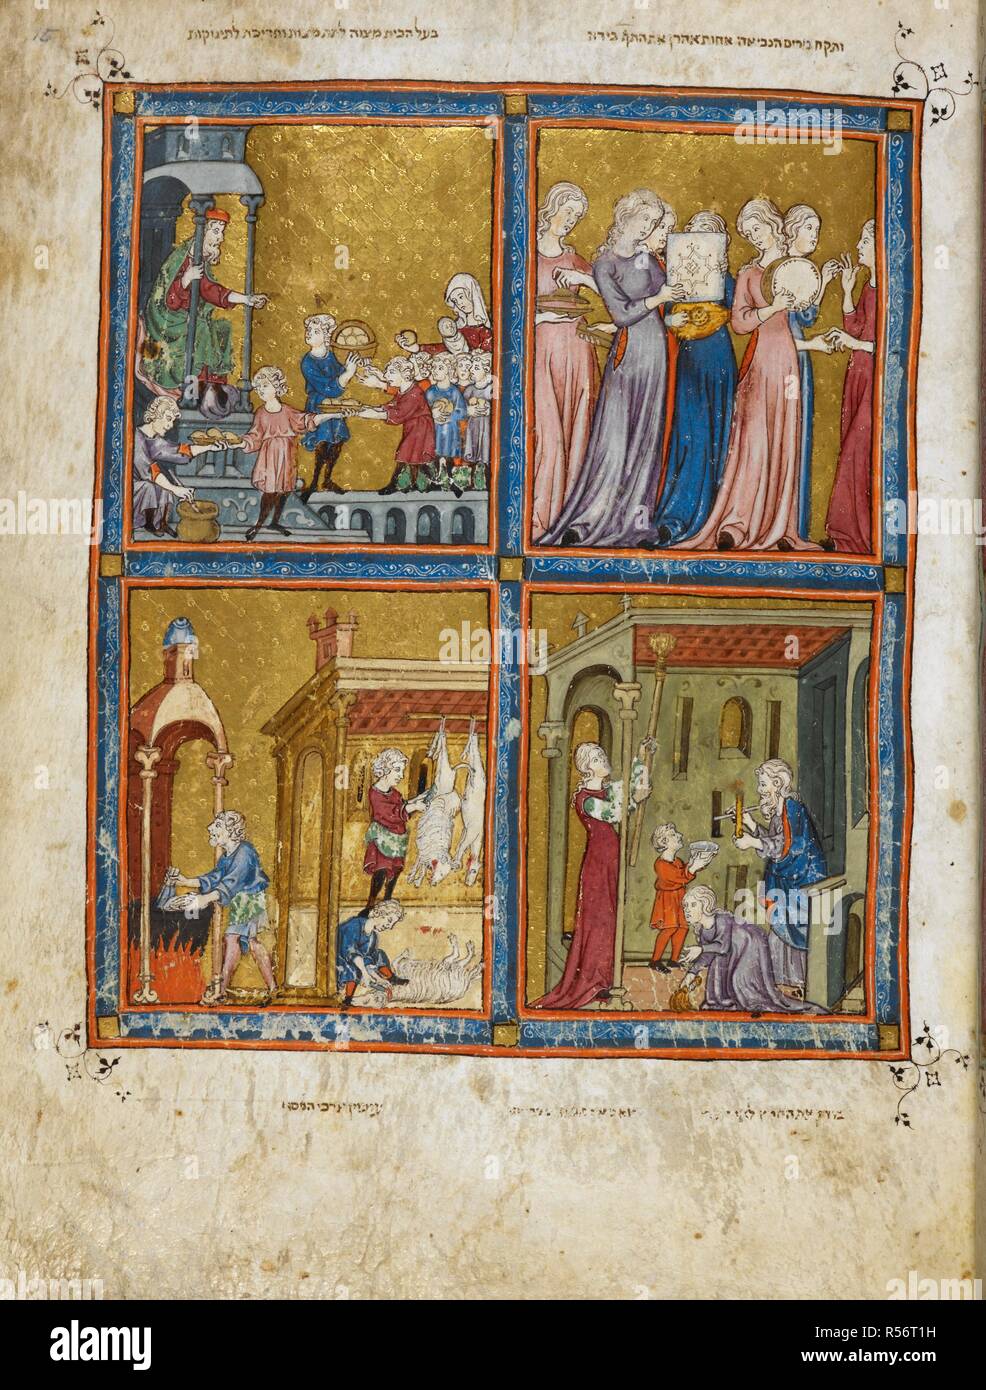 Matzot and Haroset being given to the children; Miriam the prophetess; Slaughtering of the lambs for Passover; Searching for leaven. The Golden Haggadah. Catalonia, early 14th century. Source: Add. 27210, f.15. Language: Hebrew. Stock Photo